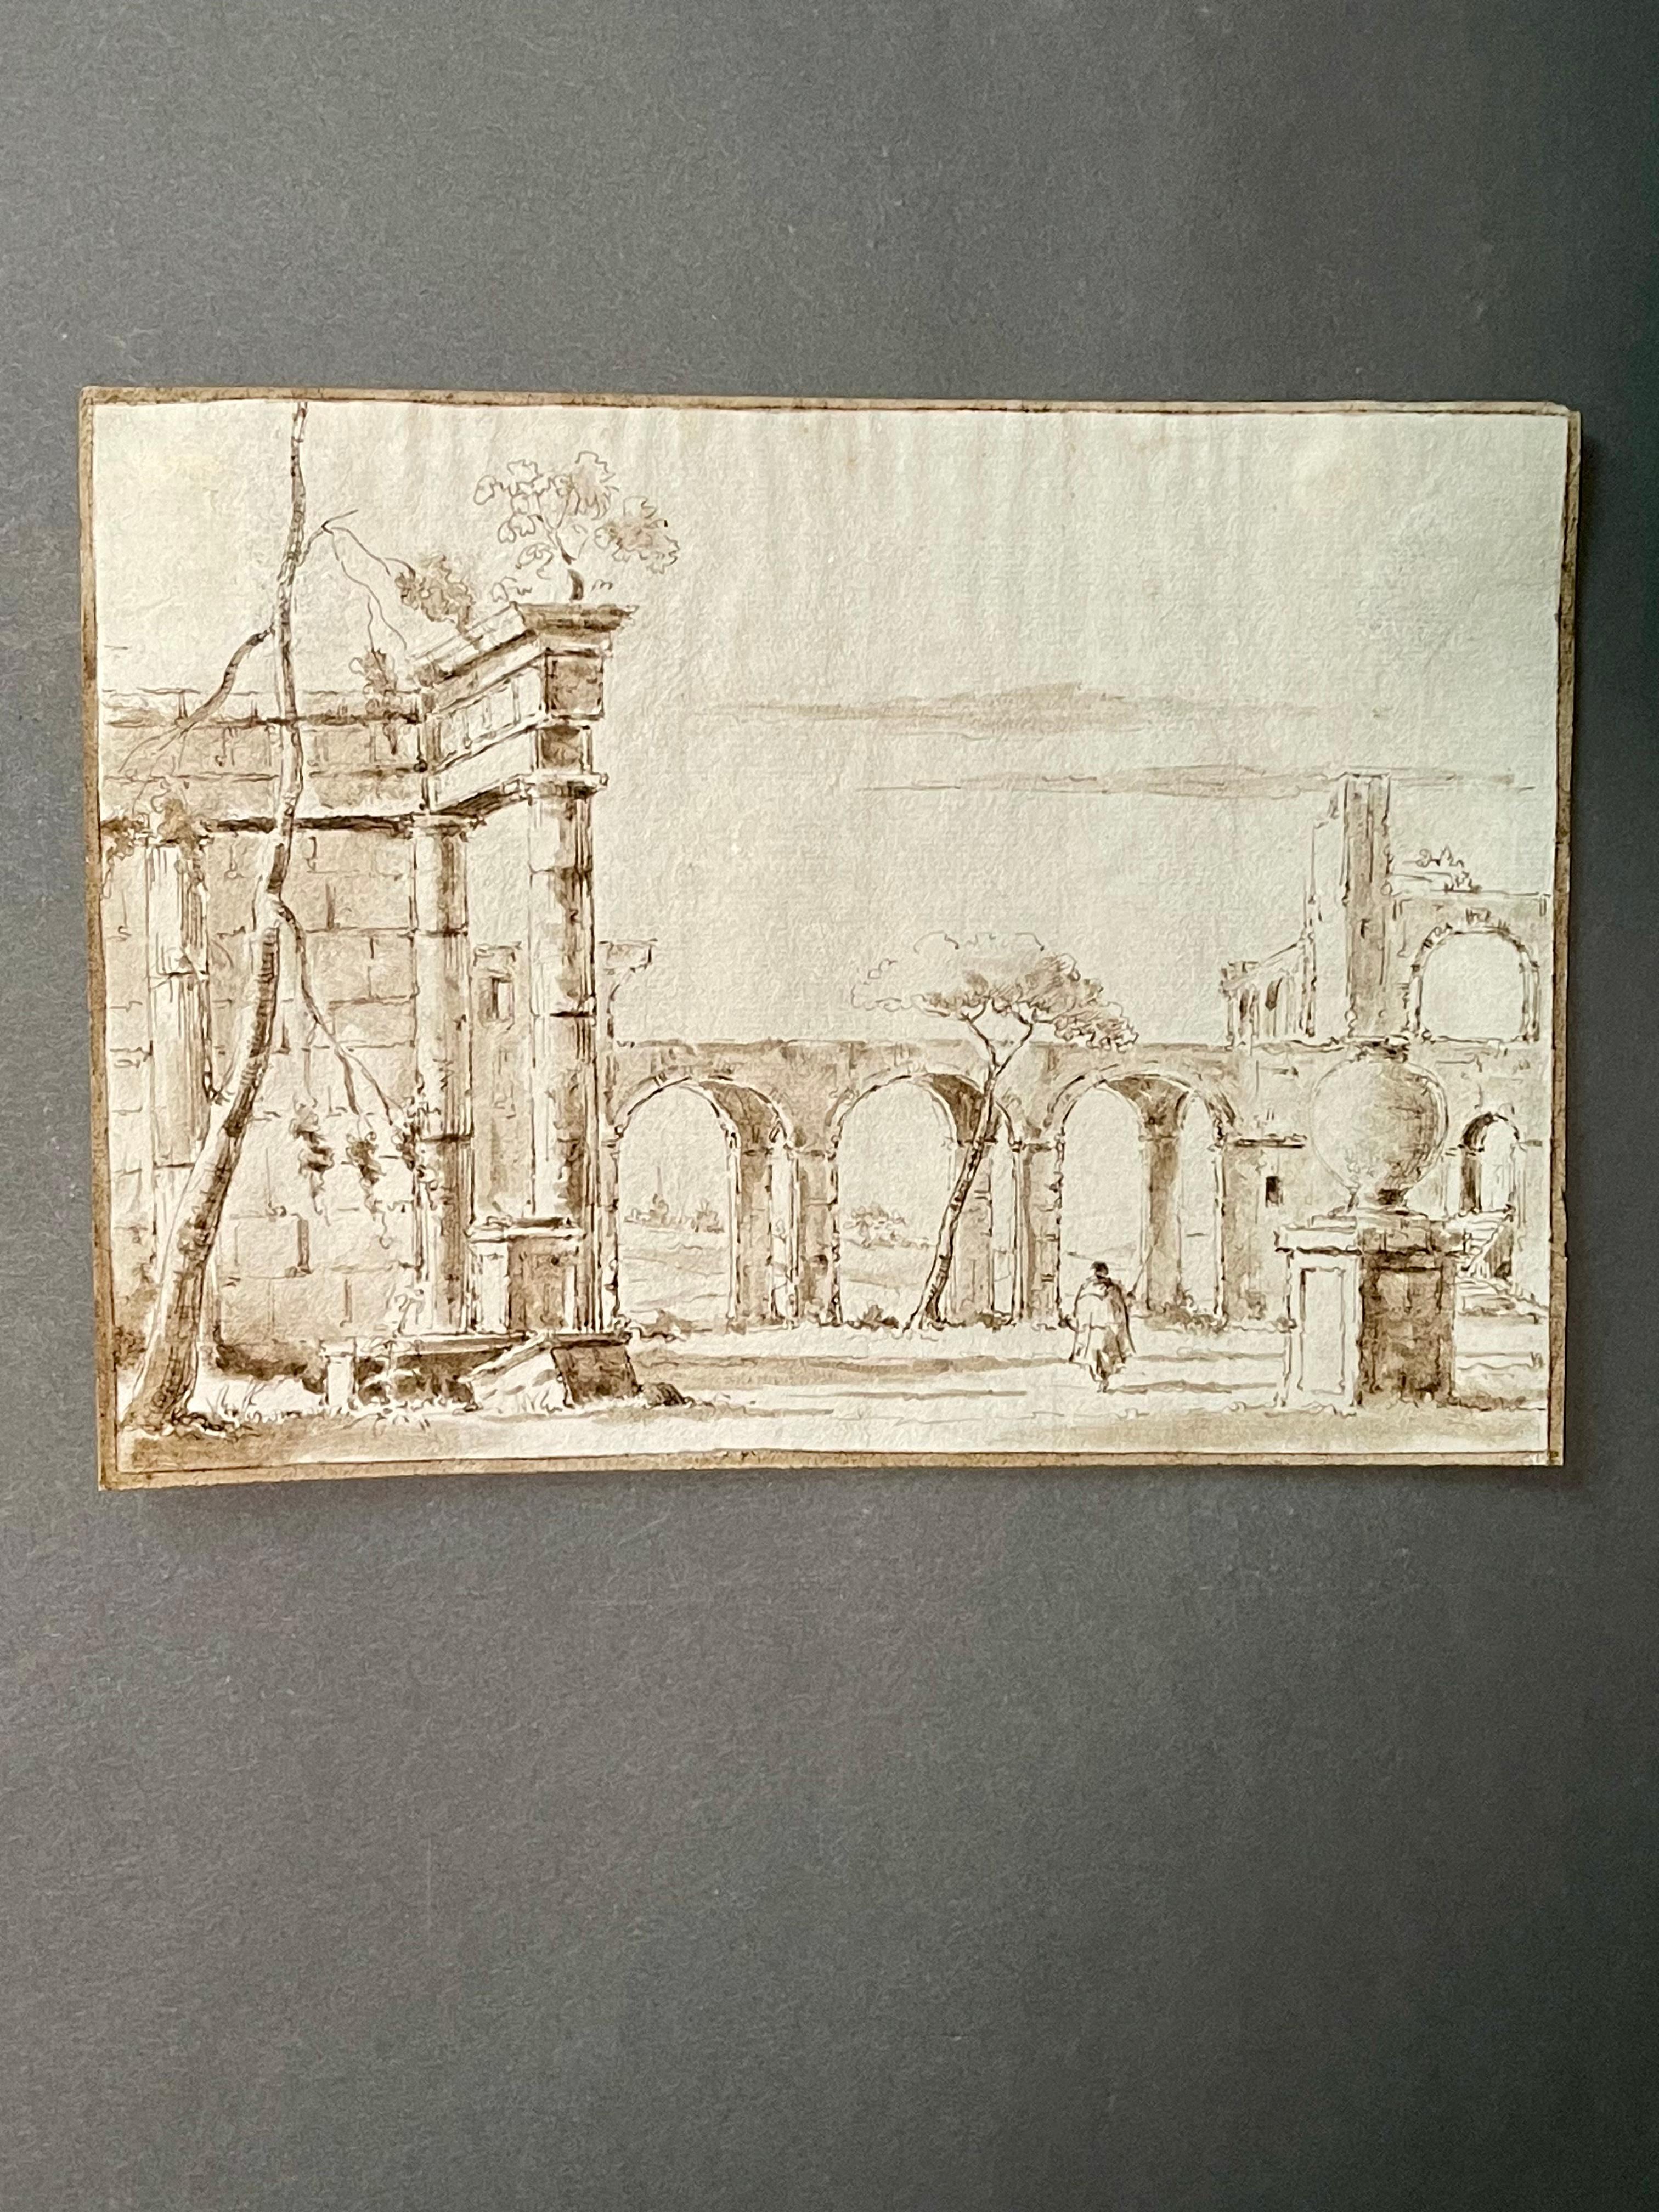 Important ink drawing representing animated landscape with ruins and aqueduct in the background
Venetian school

Every item of our Gallery, upon request, is accompanied by a certificate of authenticity issued by Sabrina Egidi official Expert in